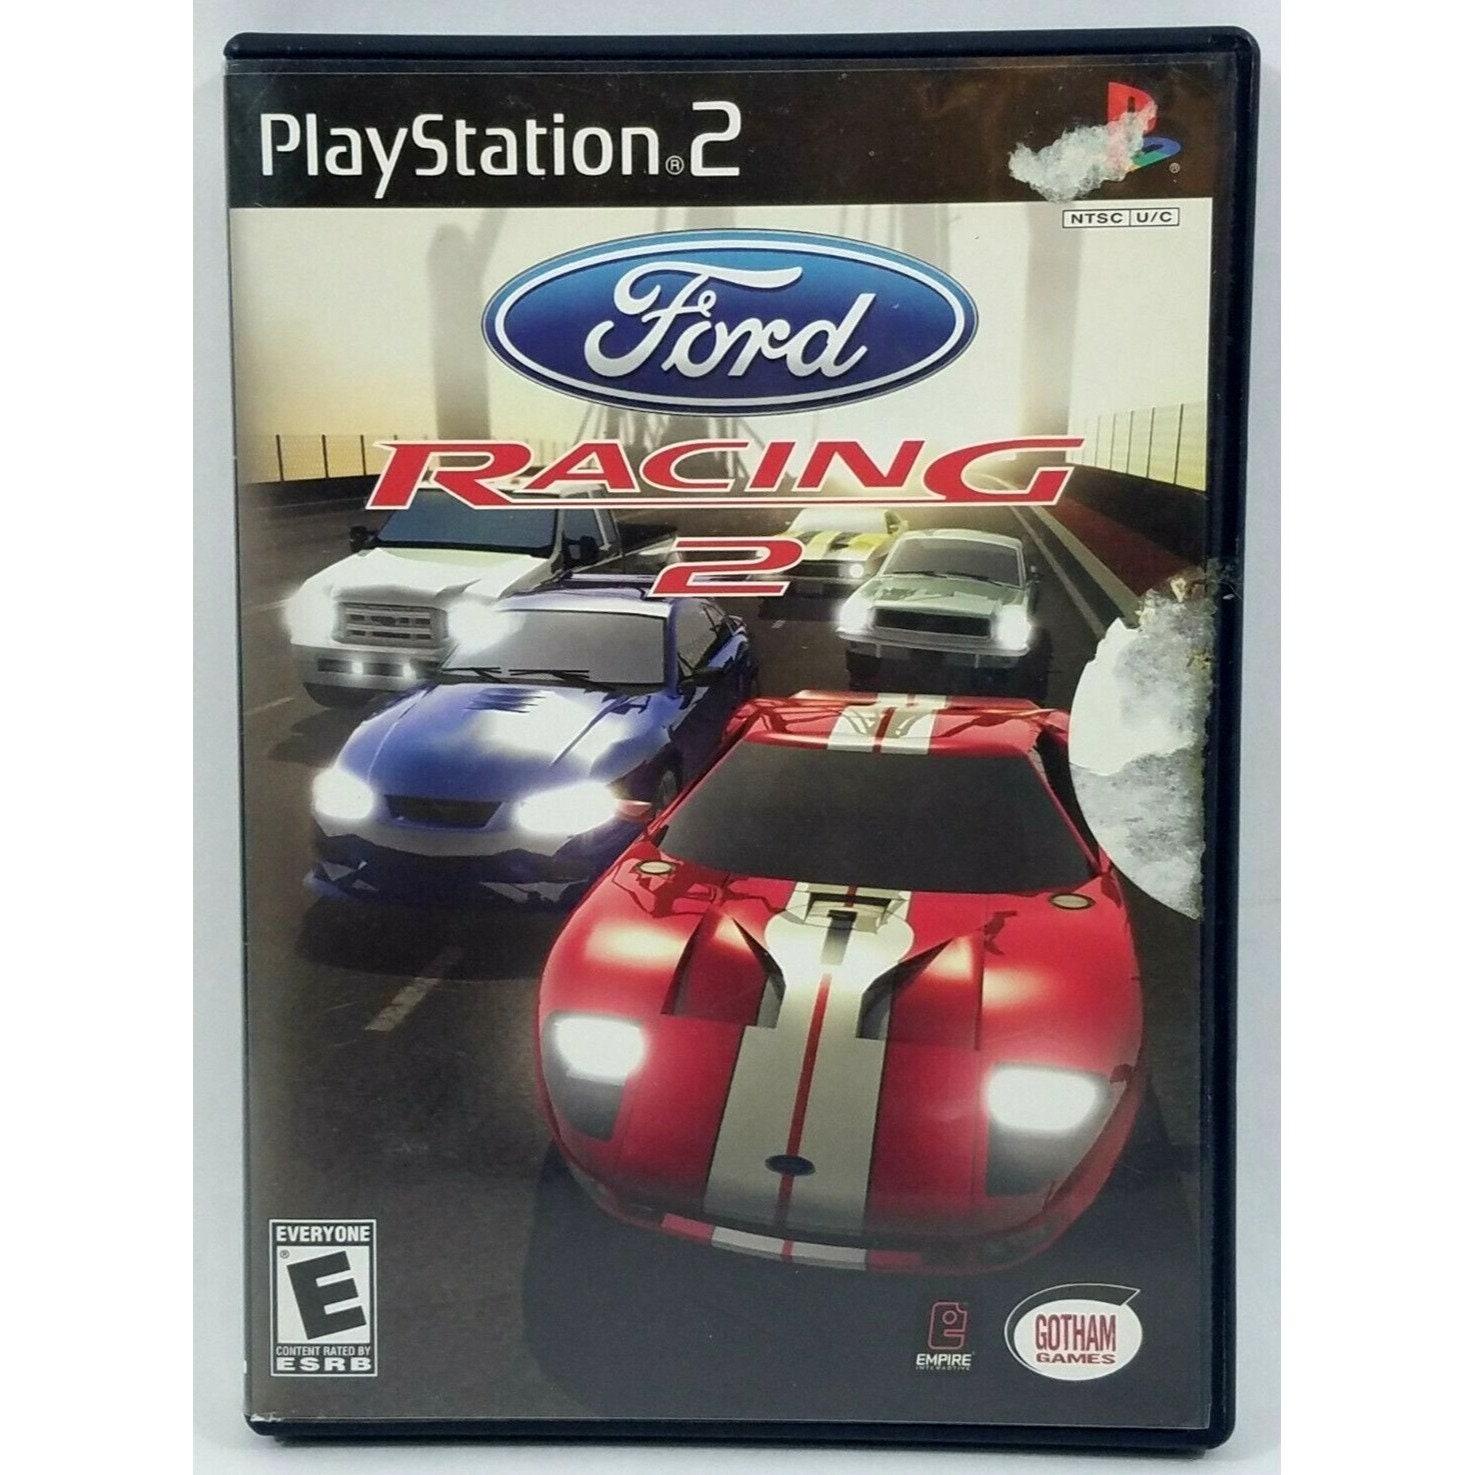 Car Driving School Simulator cover or packaging material - MobyGames